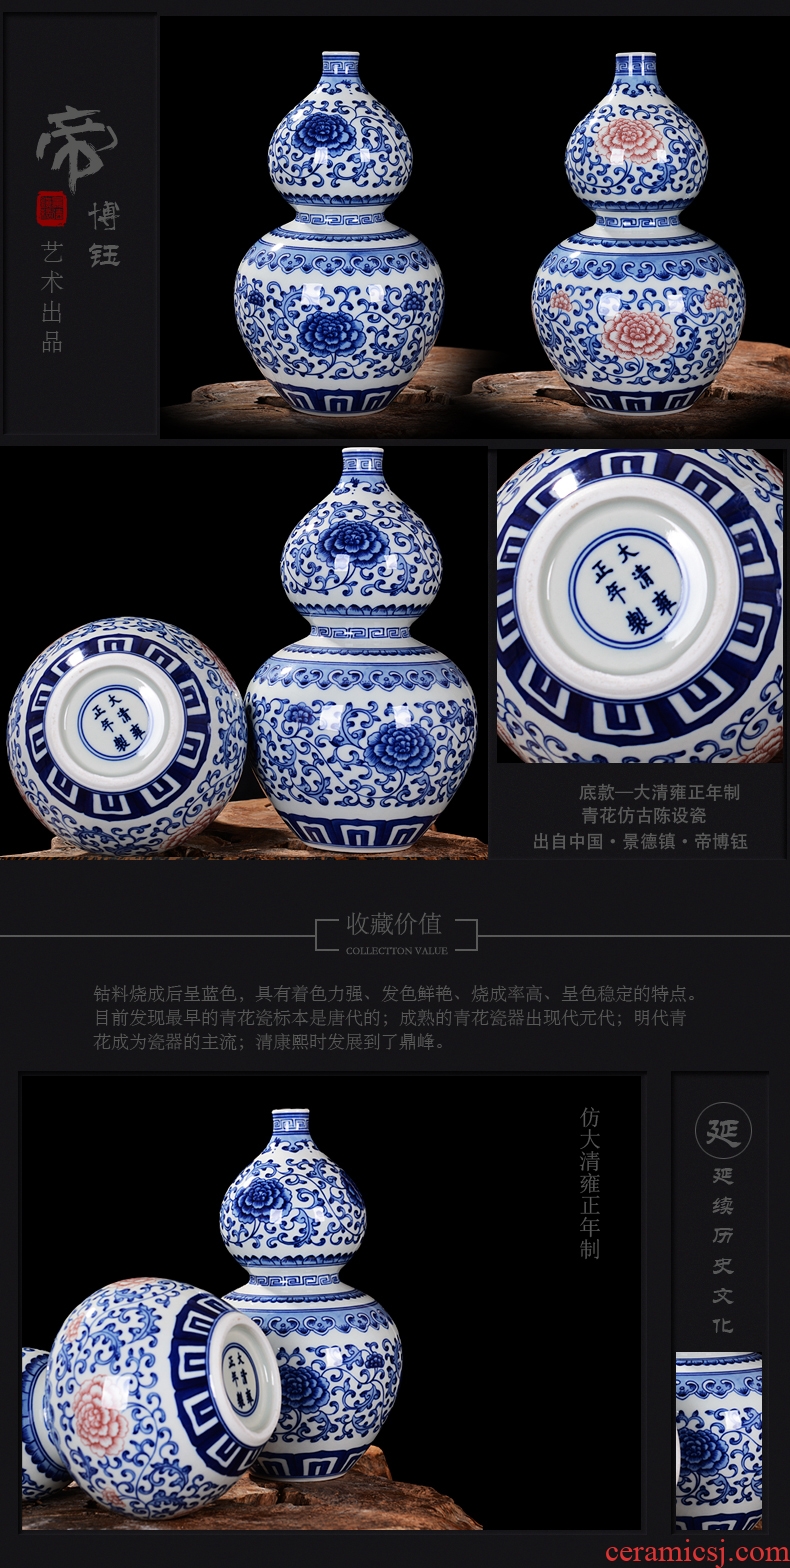 Special offer pure hand-painted put lotus flower grain gourd bottle of blue and white porcelain jingdezhen porcelain antique vase furnishing articles flowers by hand